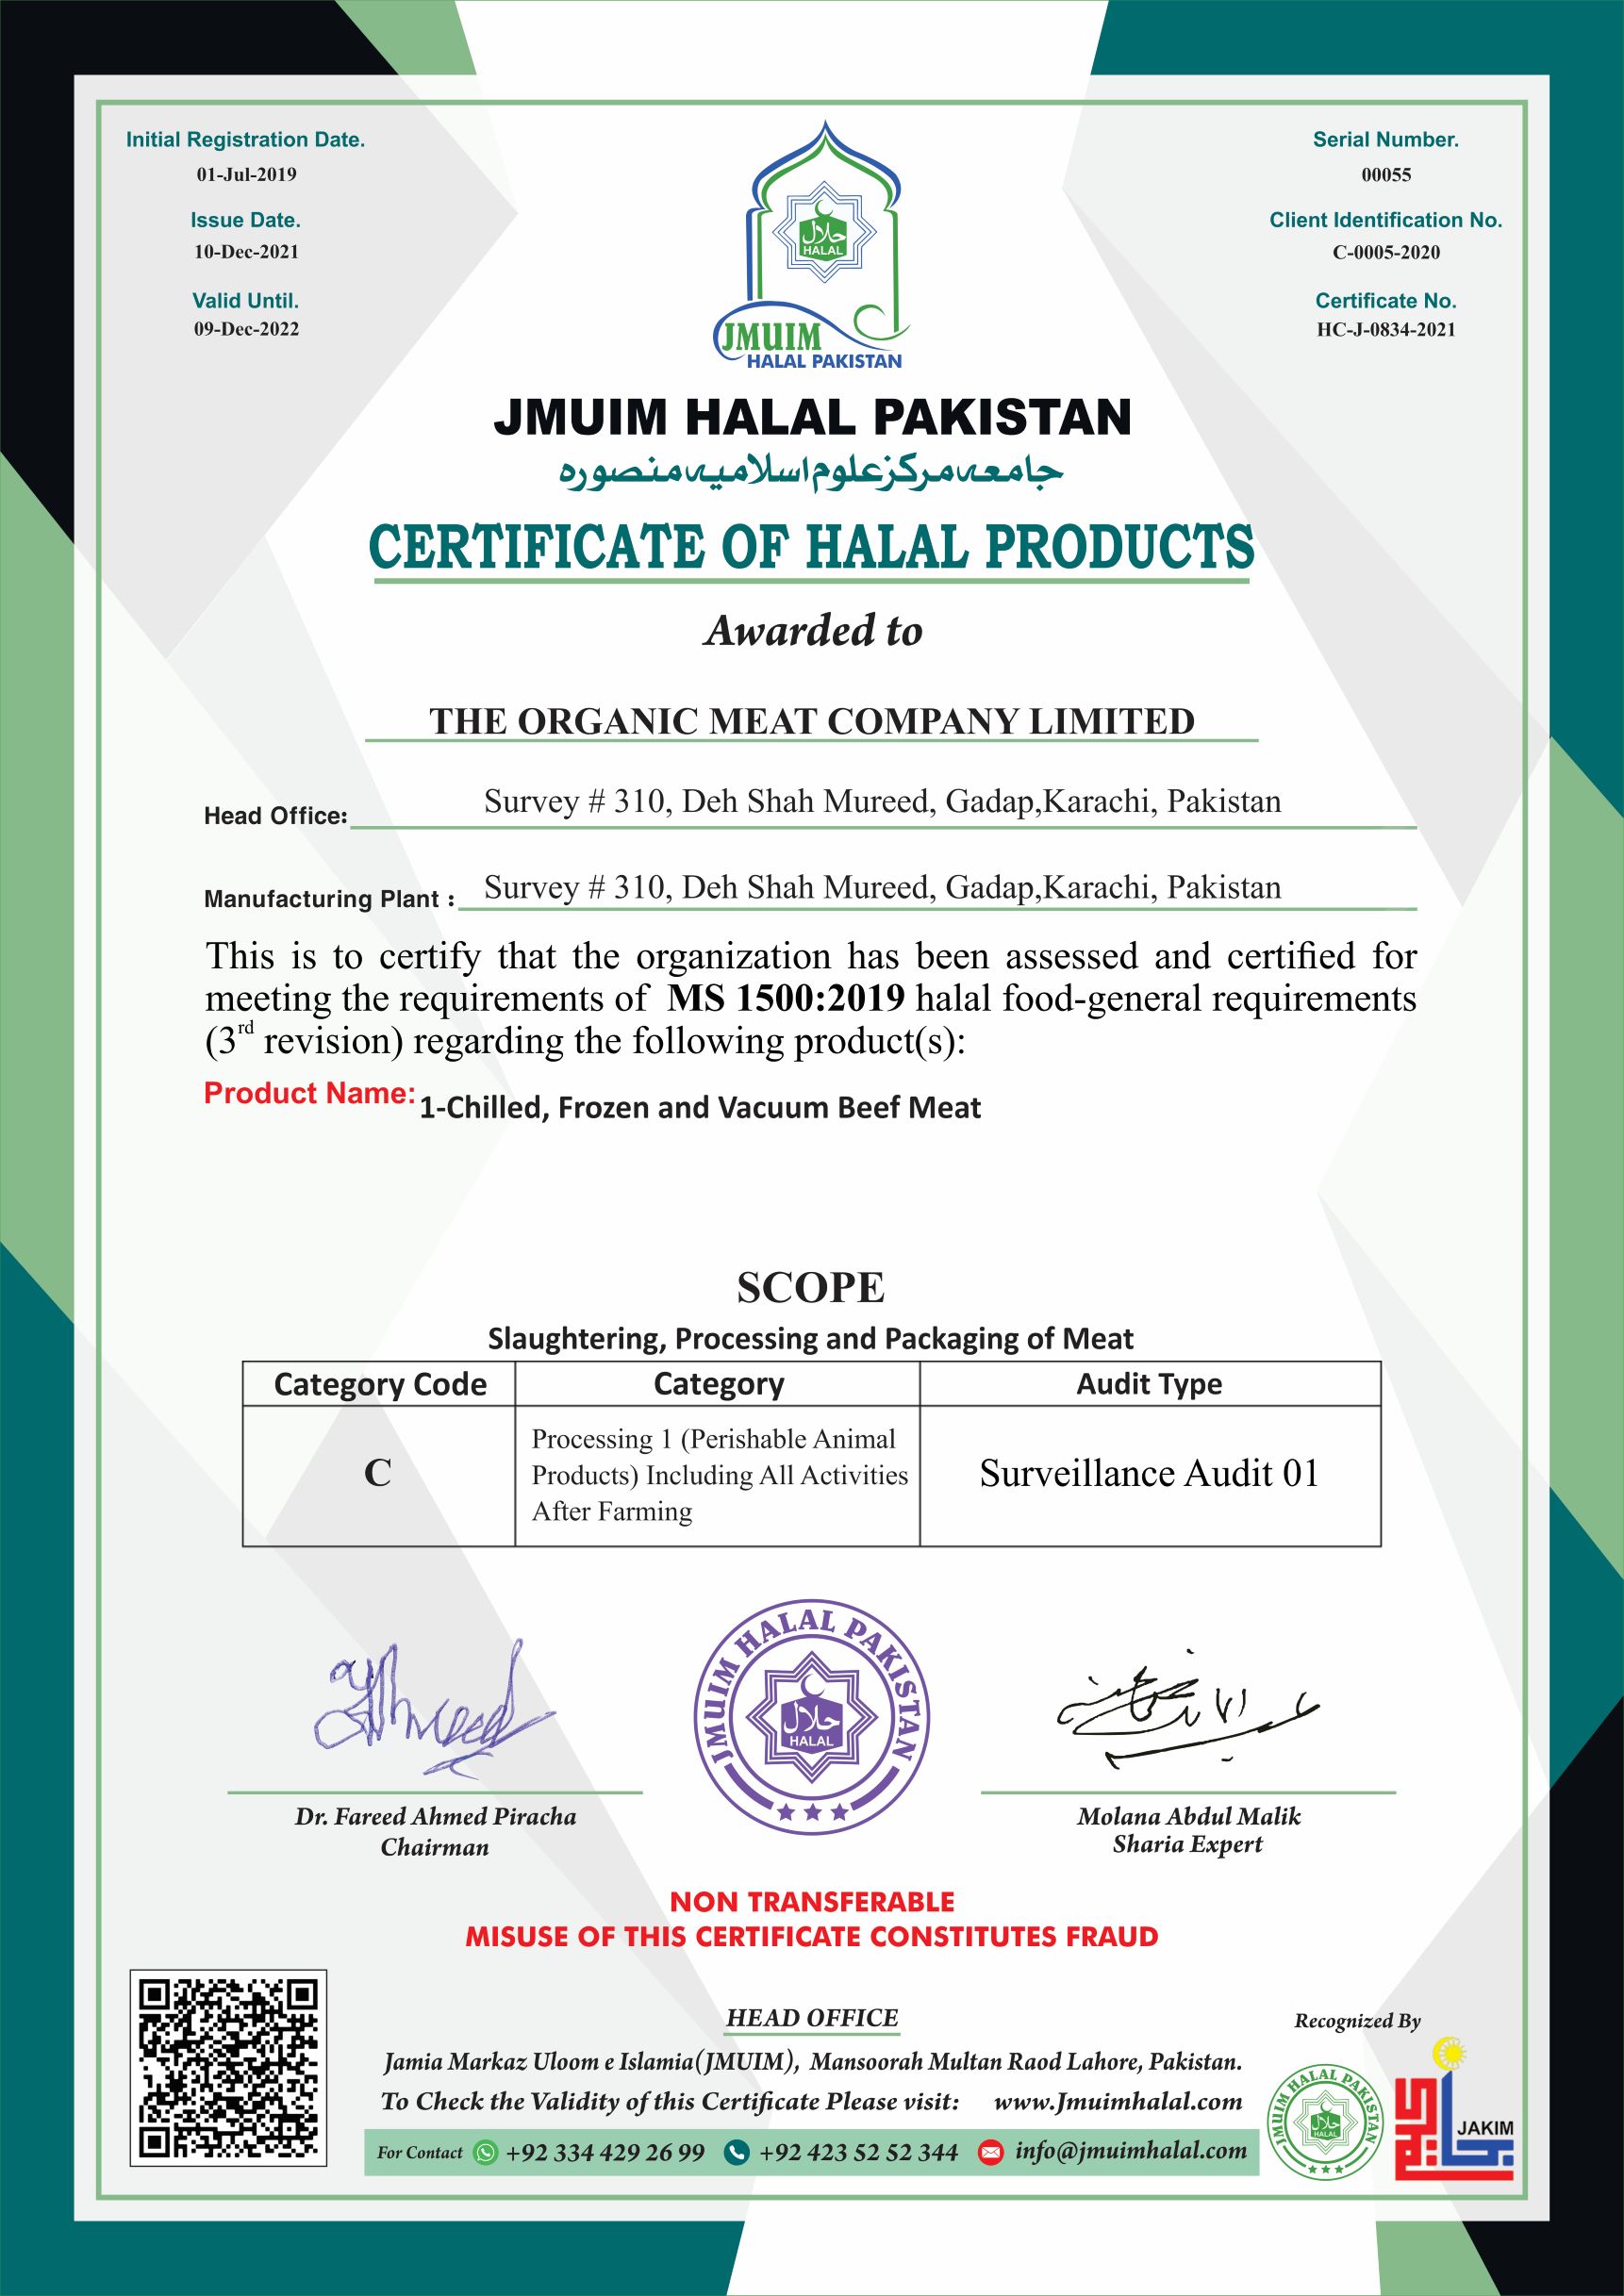 Certifications and Licenses - The Organic Meat Company Limited